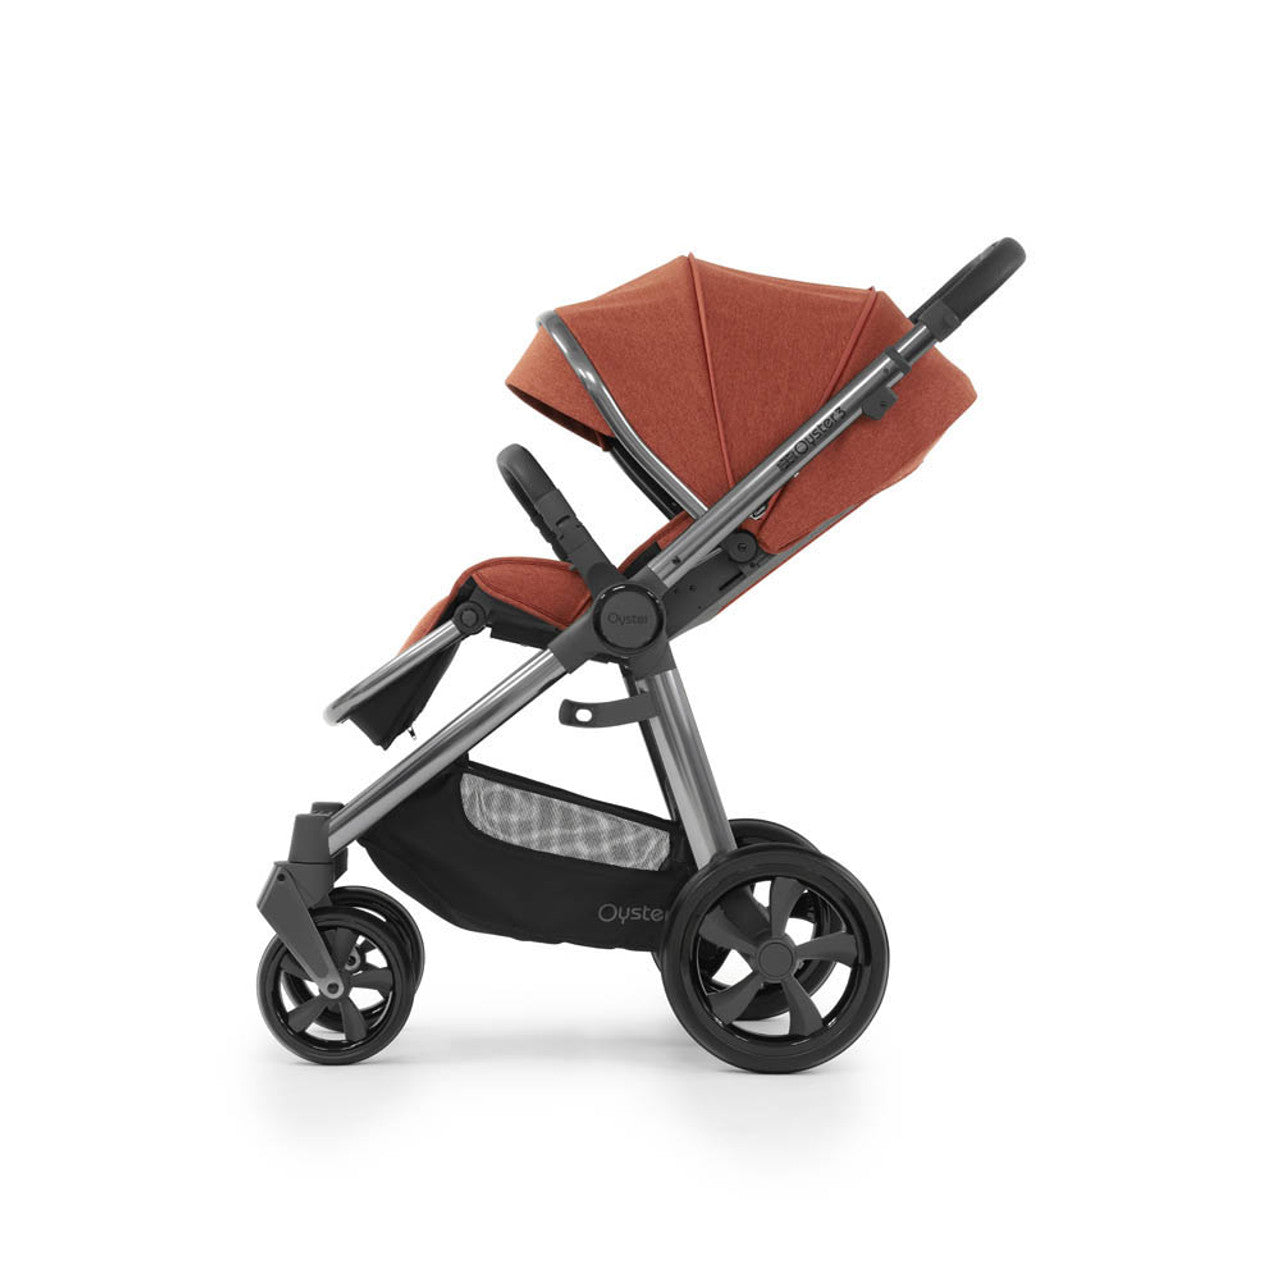 Babystyle Oyster 3 Pushchair - Gun Metal Chassis/Ember